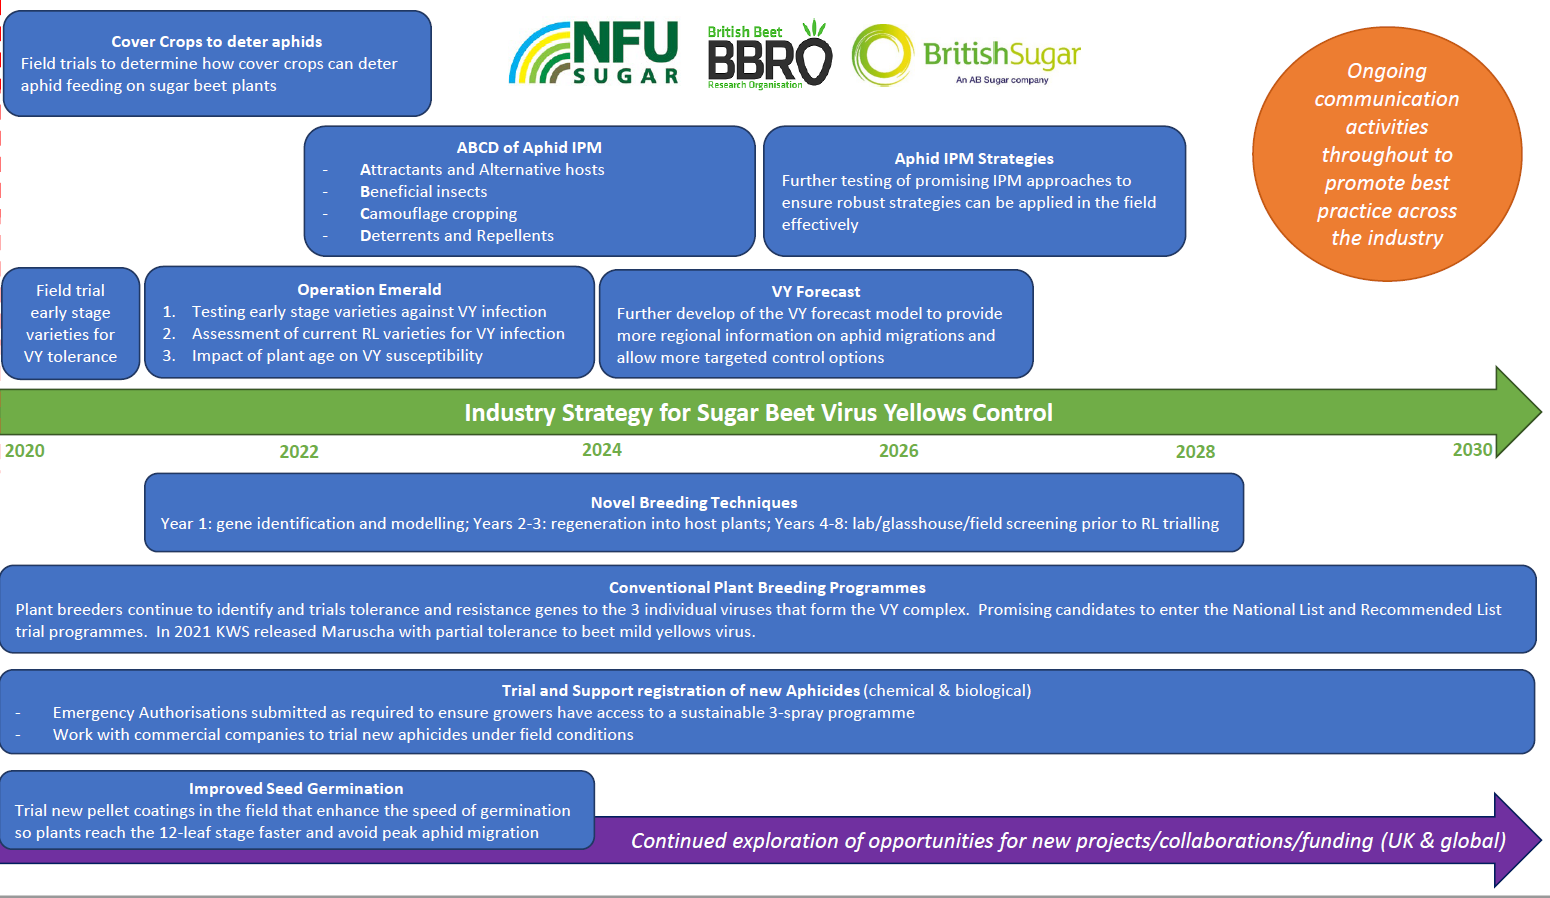 UK sugar beet industry's virus yellows strategy summary (Published 2022) Note that all dates are estimates and subject to change